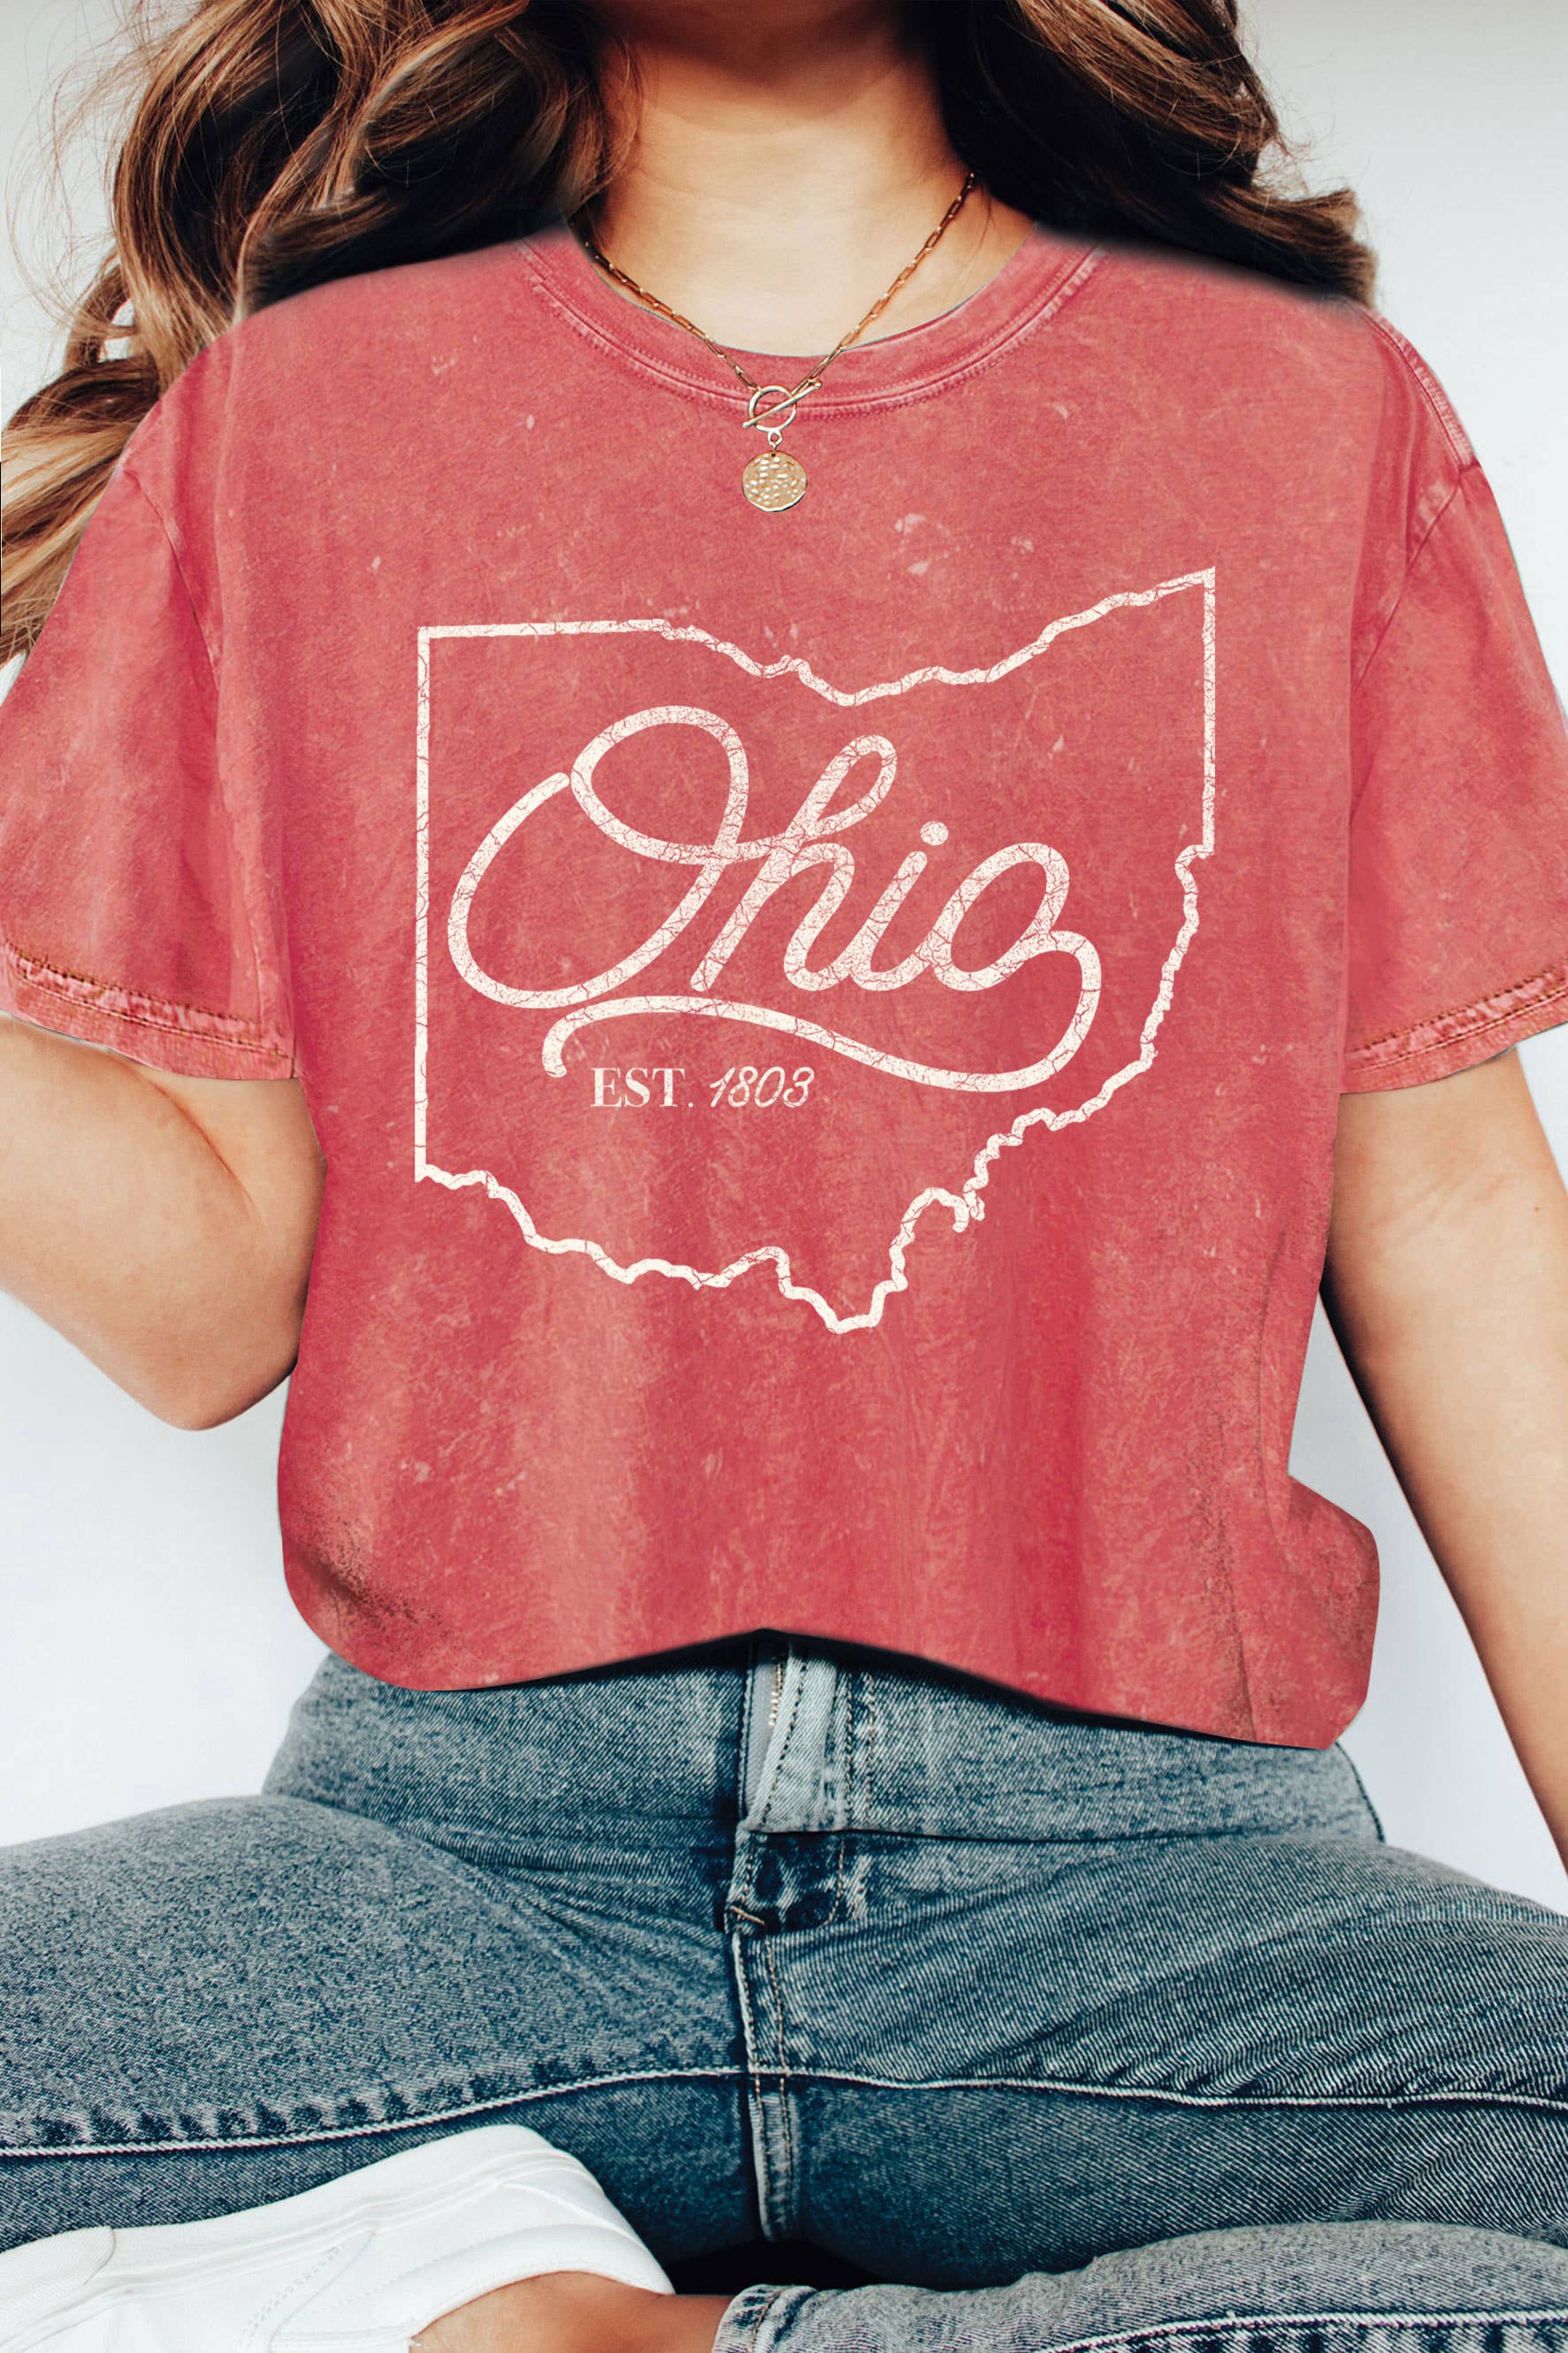 OHIO STATE PUFF MINERAL GRAPHIC TSHIRTS: TEABERRY - Storm and Sky Shoppe